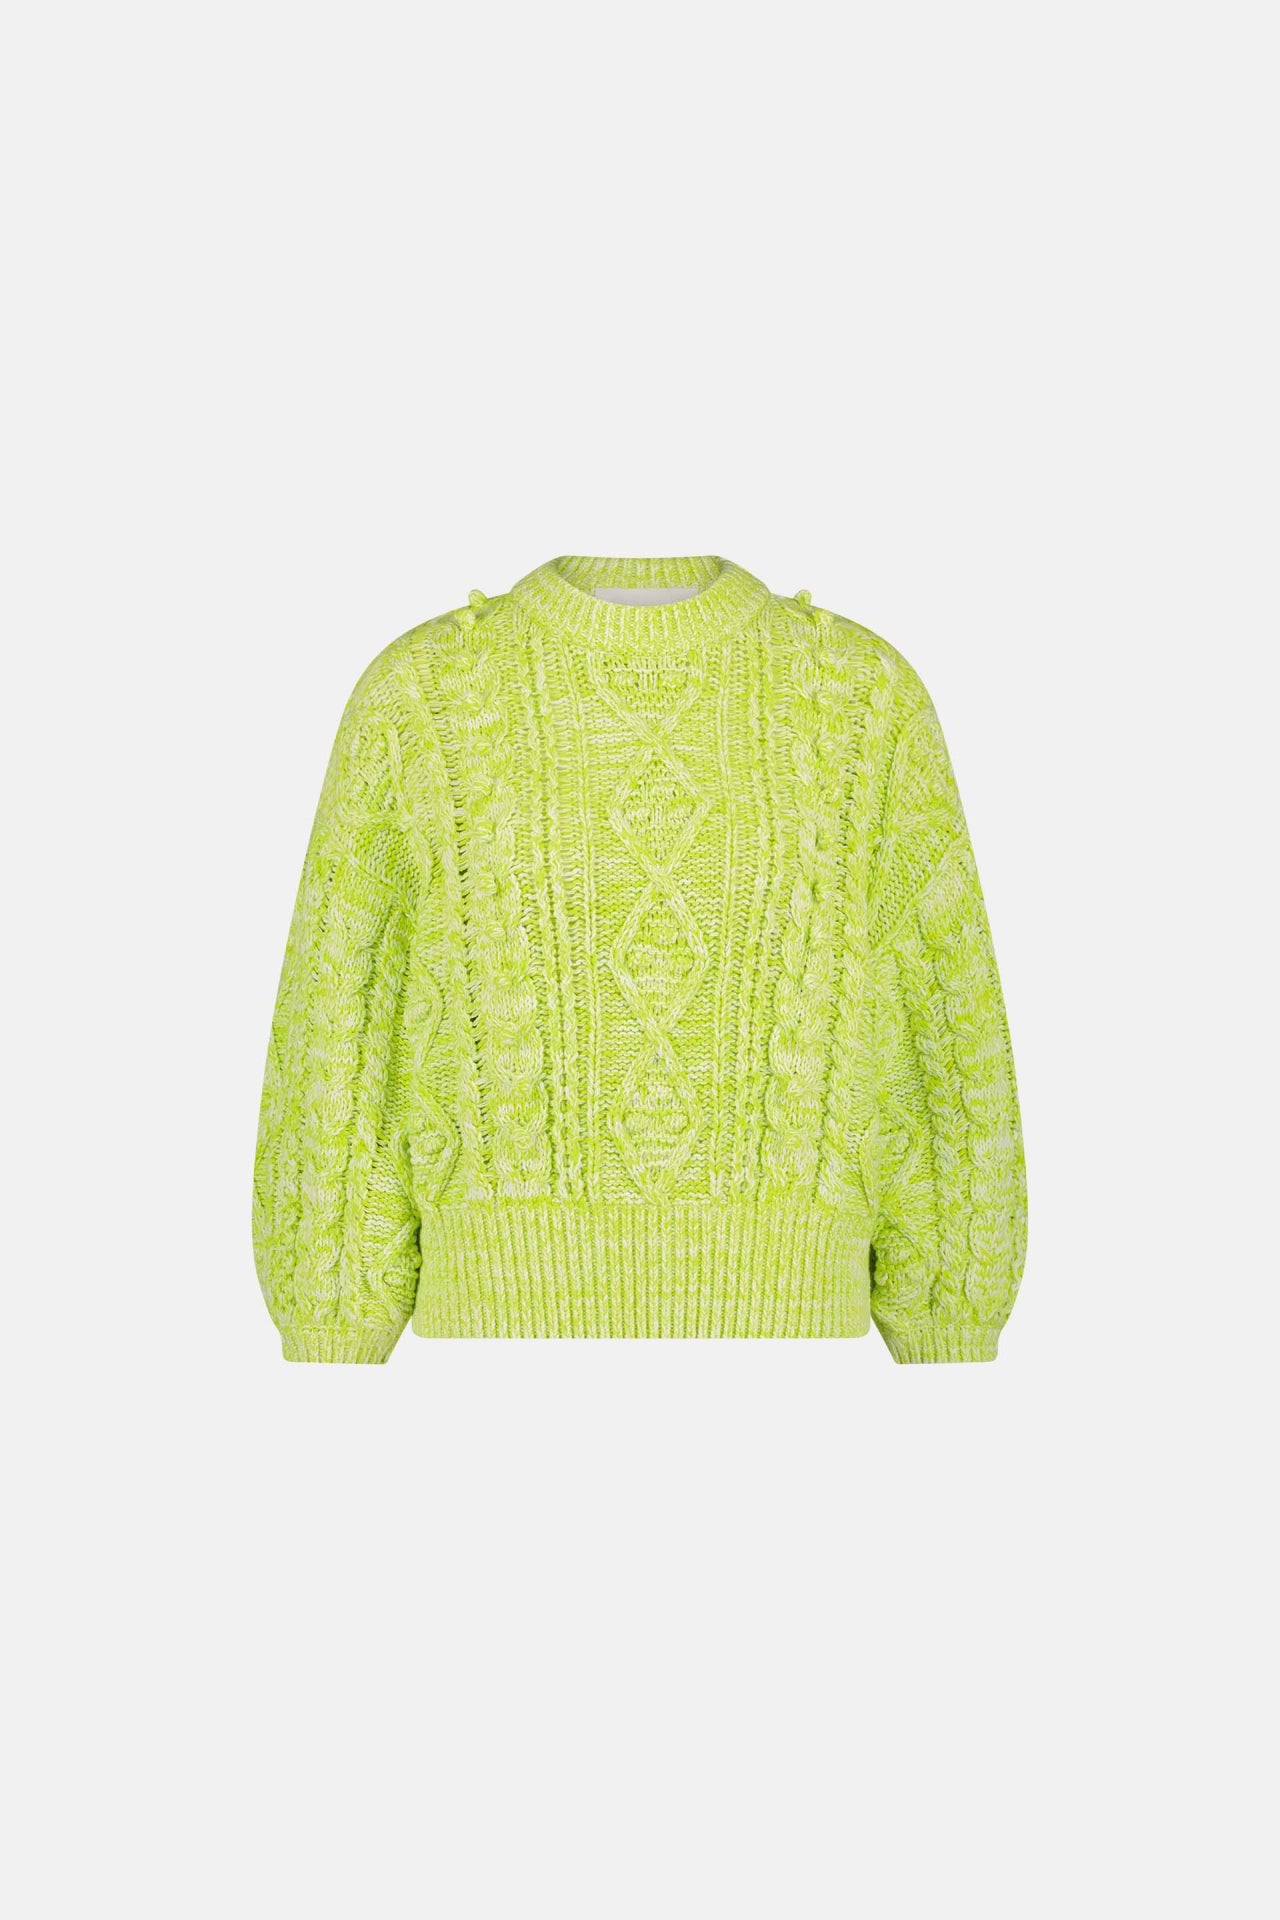 Suzy 3/4 sleeve Pullover | Lovely Lime